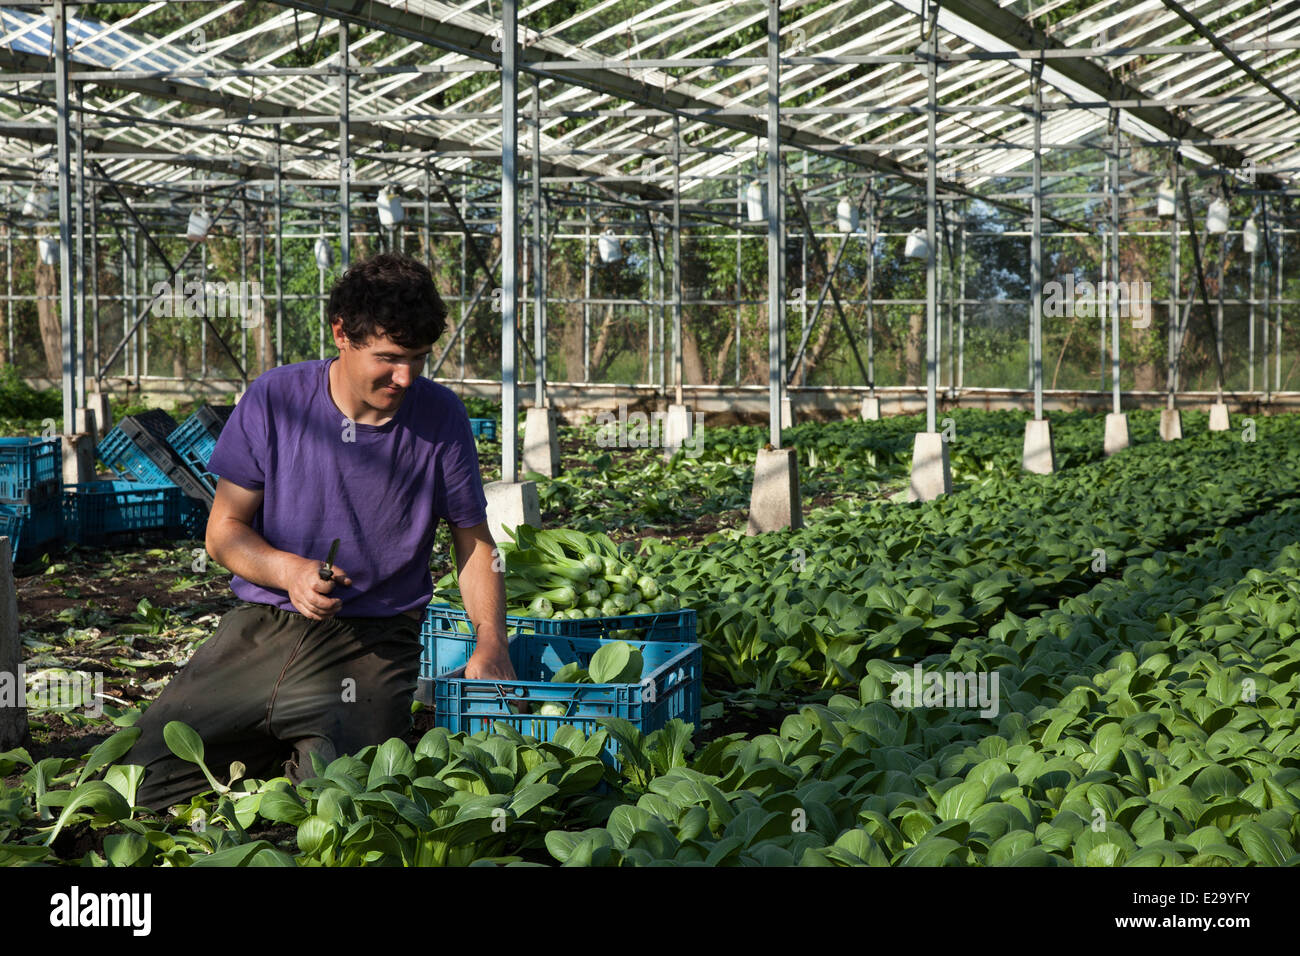 Tarleton, Preston, UK 18th June, 2014.  Paulo Rodrigues (MR) harvesting greenhouse salad crops in sweltering conditions. Portuguese migrant labourers picking the second crop of Tatsoi lettuce for market as the warm weather makes for a good growing season in this market gardening area.  Salad consumption is at its highest level in the history of eating and in summer months mean demand goes crazy, which is all good news for the regions salad bowl, the West Lancashire coastal plain between Preston and Southport where miles of rich, black soil provide an ideal growing medium. Stock Photo